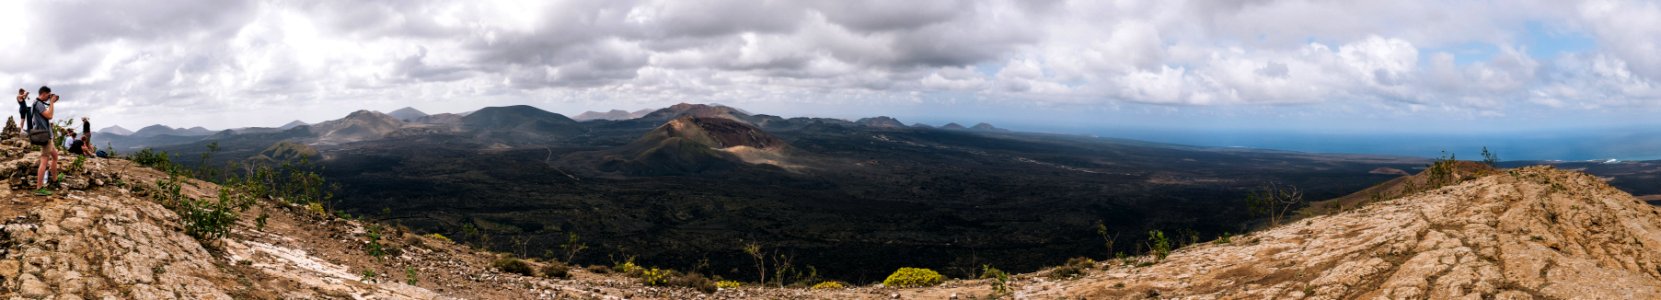 panorama photography of mountain range under cloudy sky